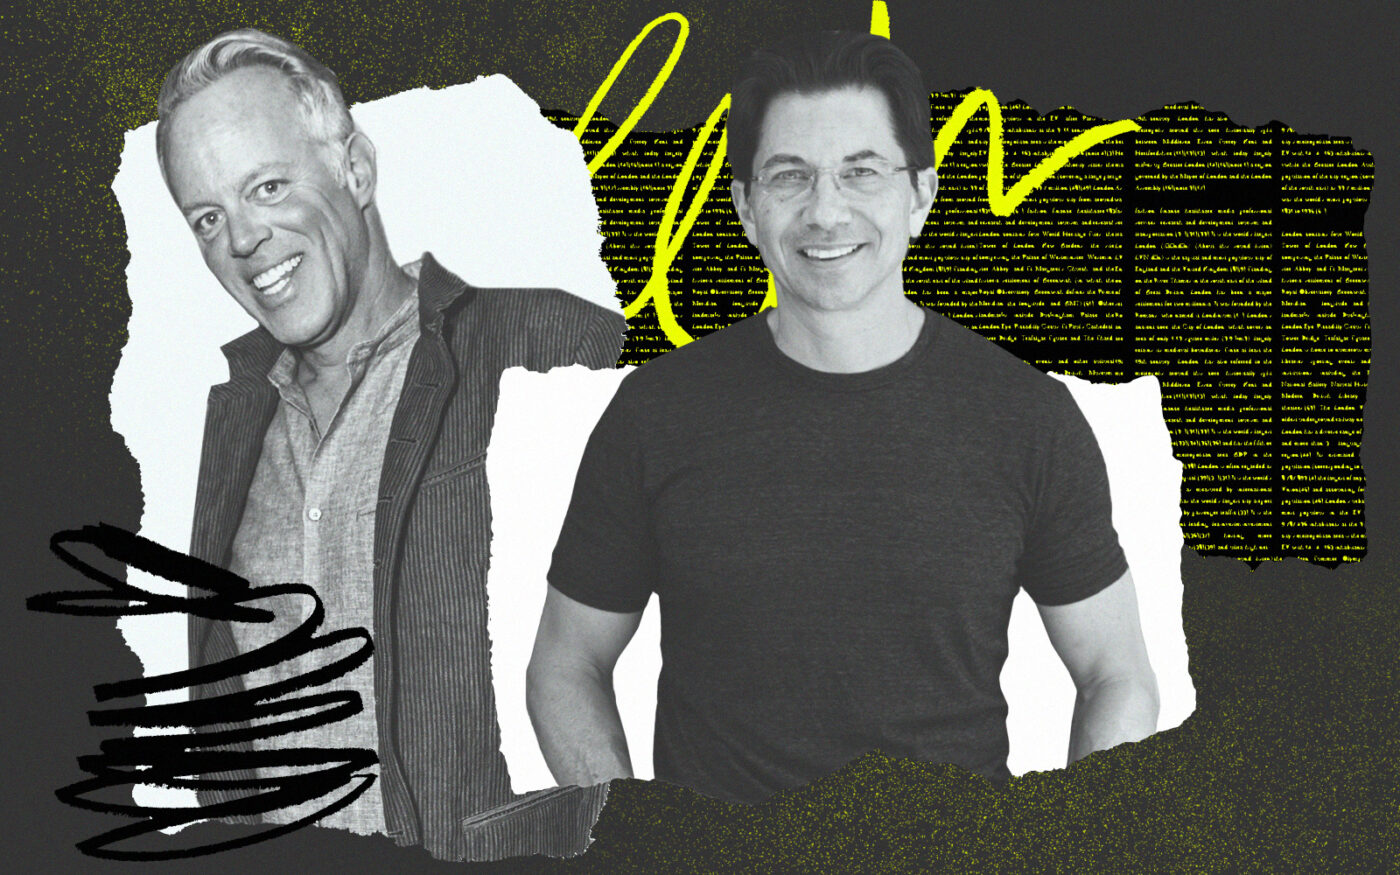 Flipping Vegas' Scott Yancey and Own Your Future podcaster Dean Graziosi